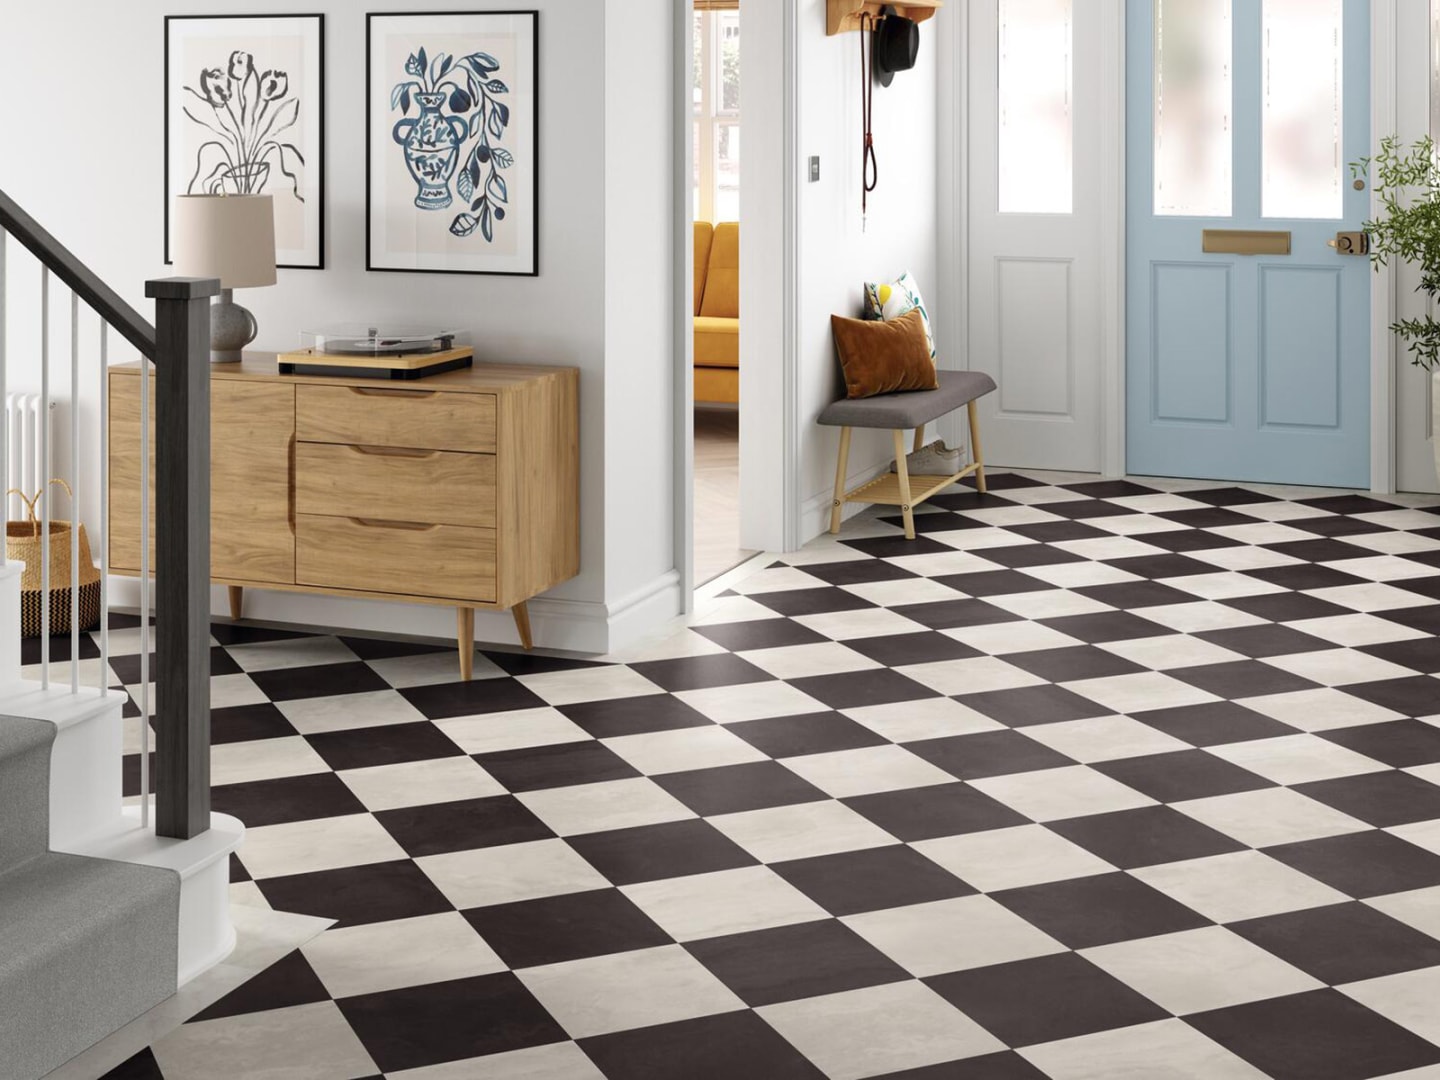 The Hallway floor features White Marble, SS5S2618 and Black Marble, SS5S2621.